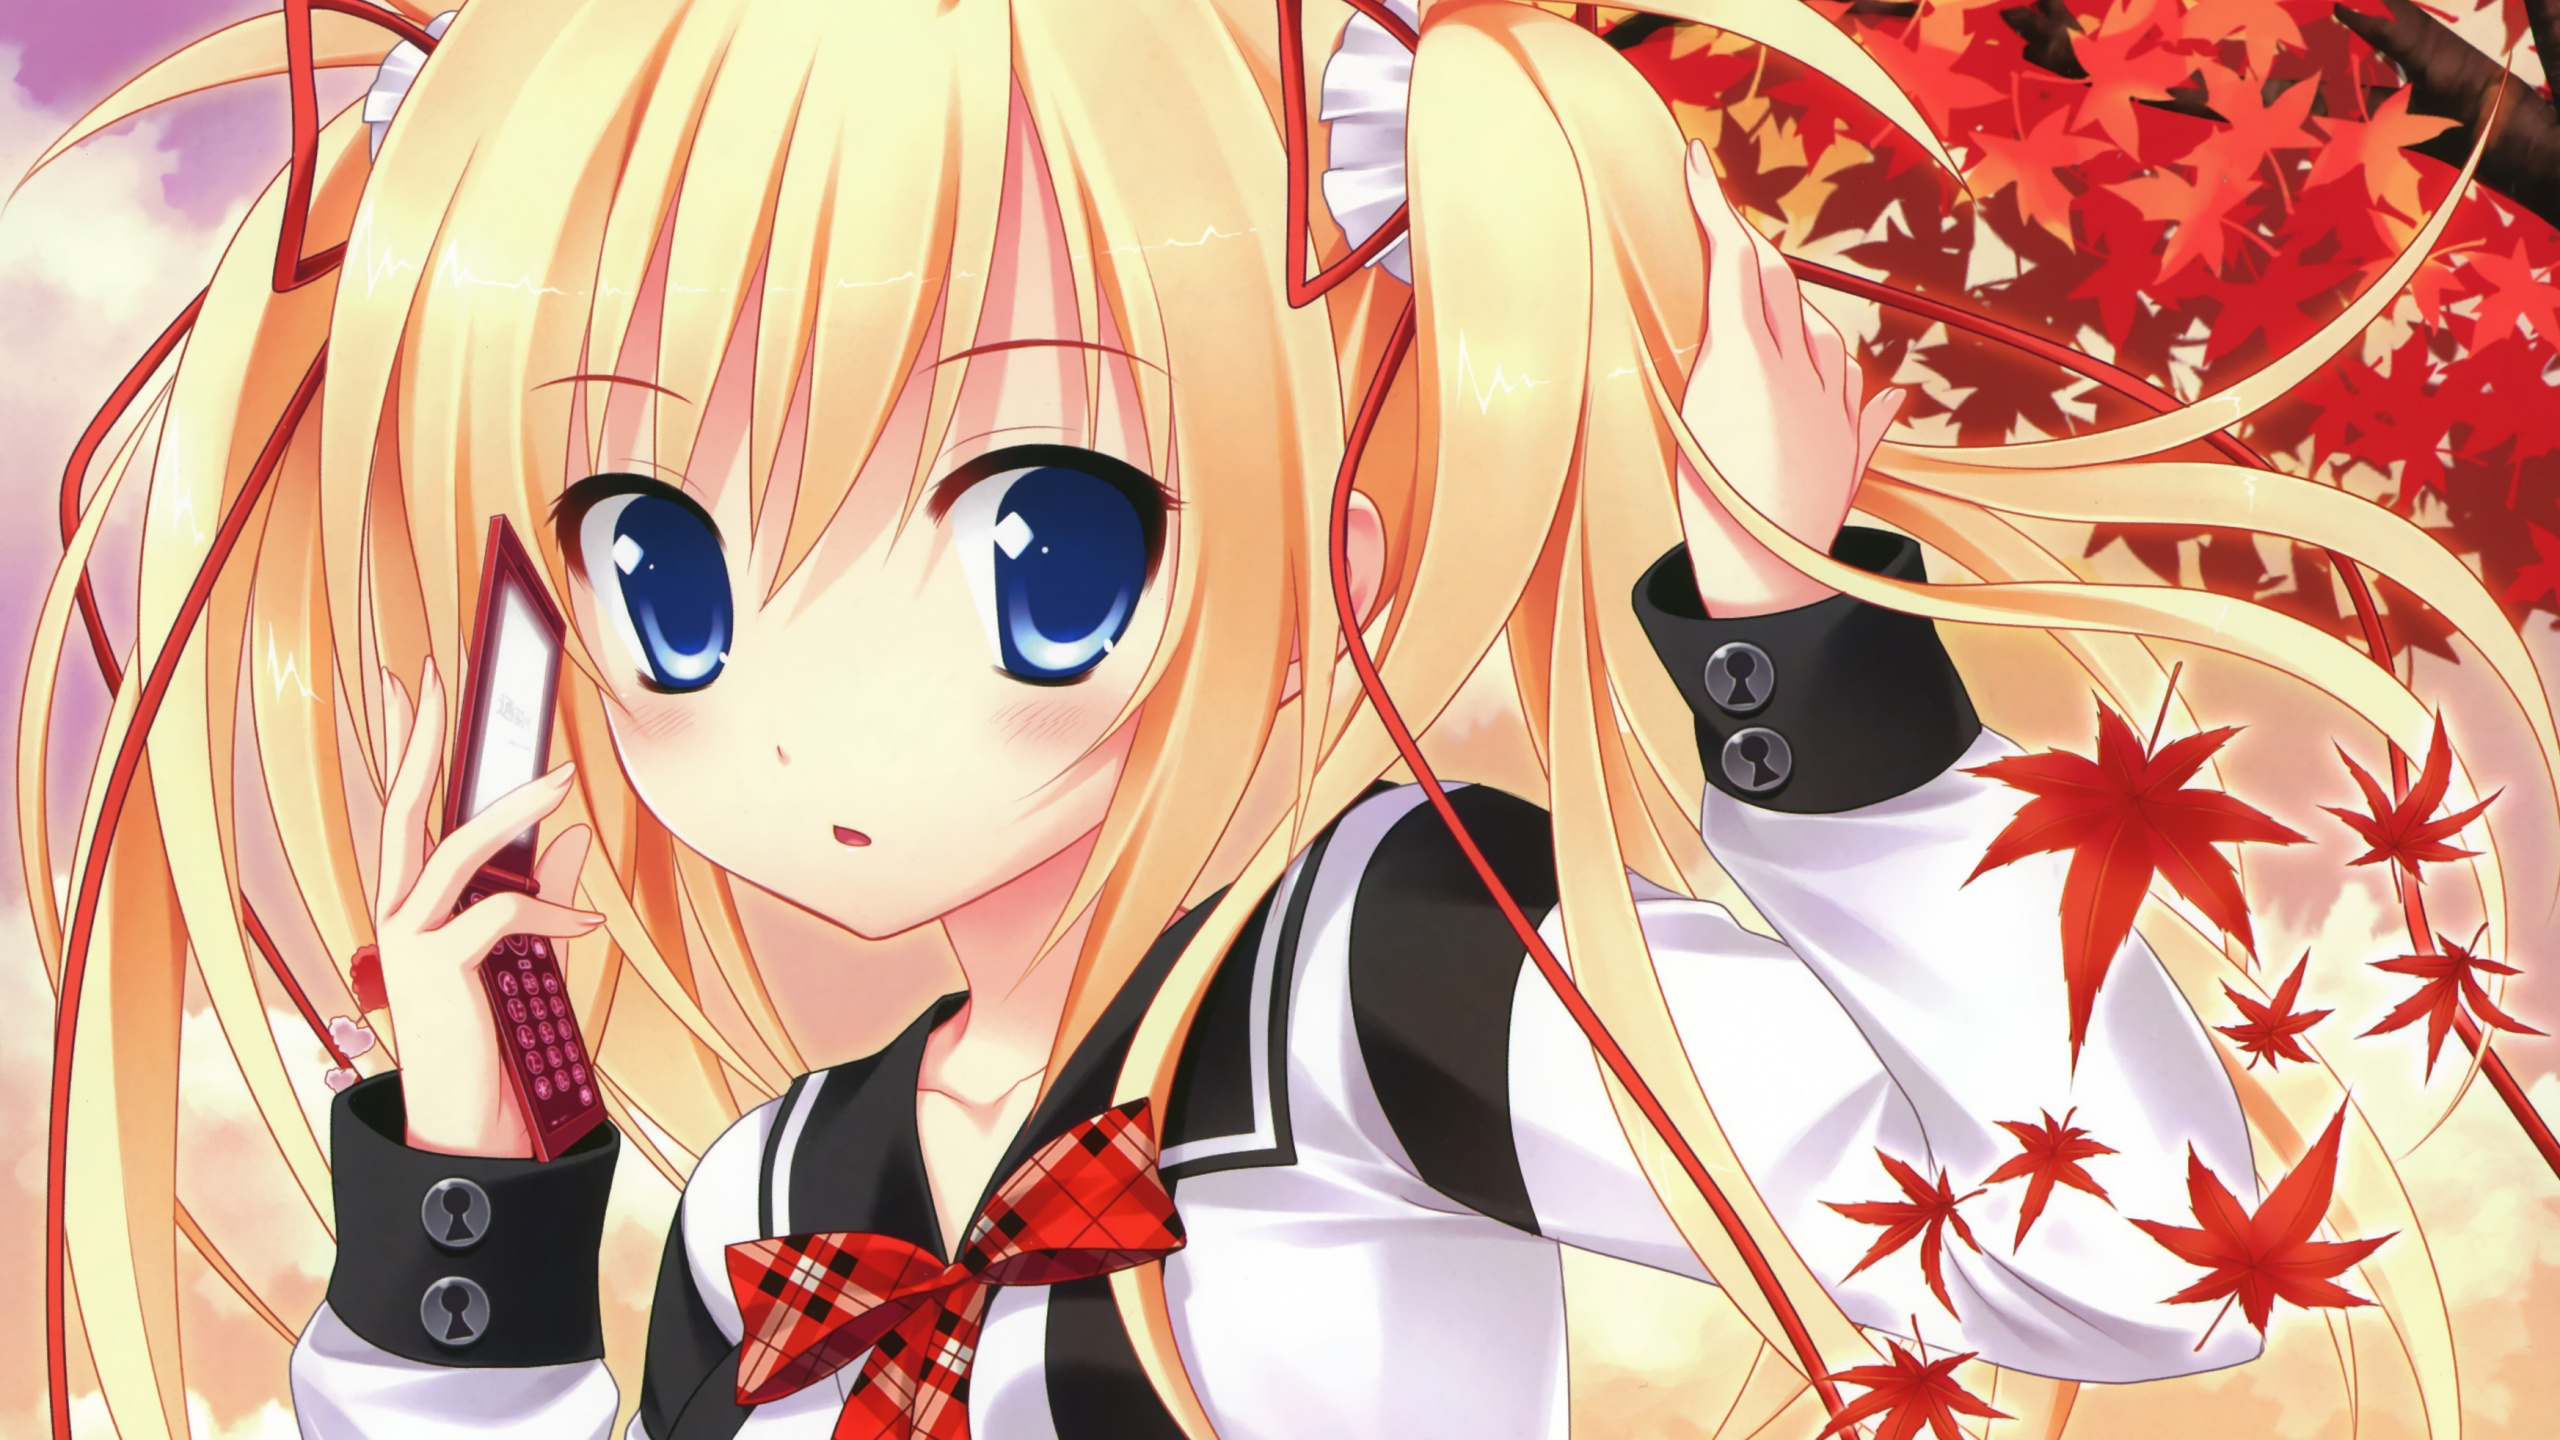 Personnage D'anime Fille Aux Cheveux Blonds. Wallpaper in 2560x1440 Resolution